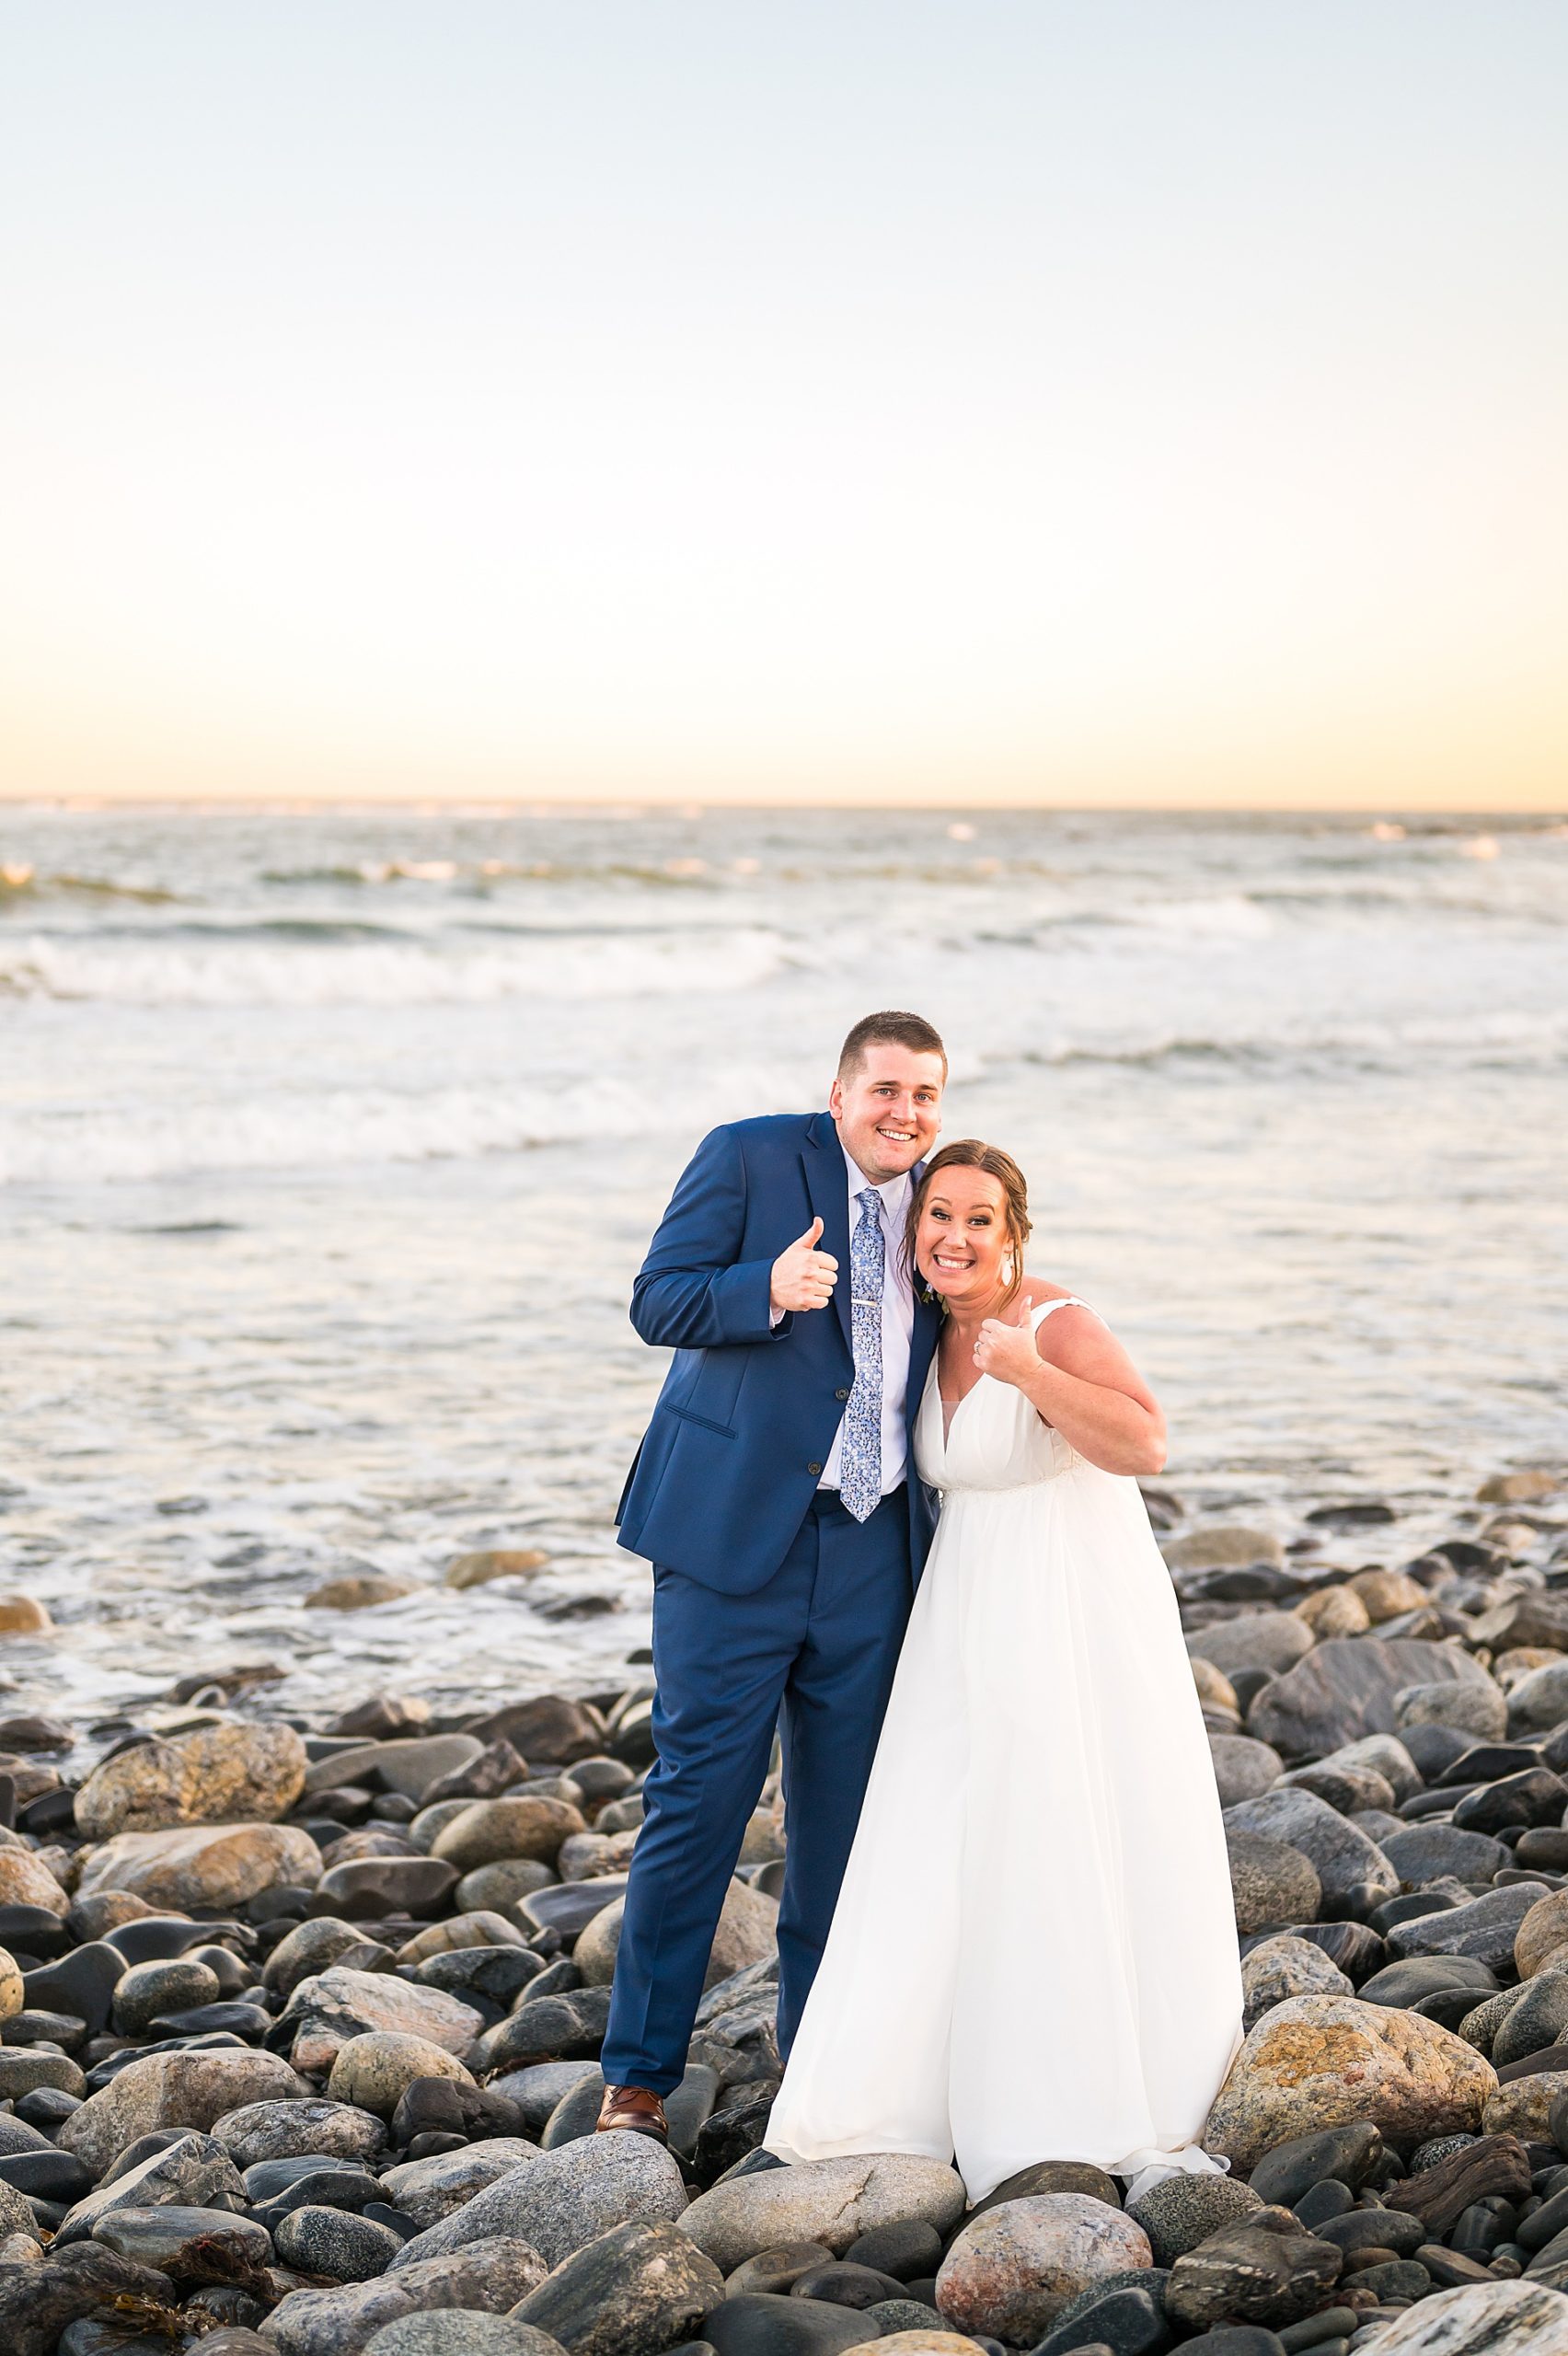 newlyweds give a thumbs up sign during beach wedding portraits 